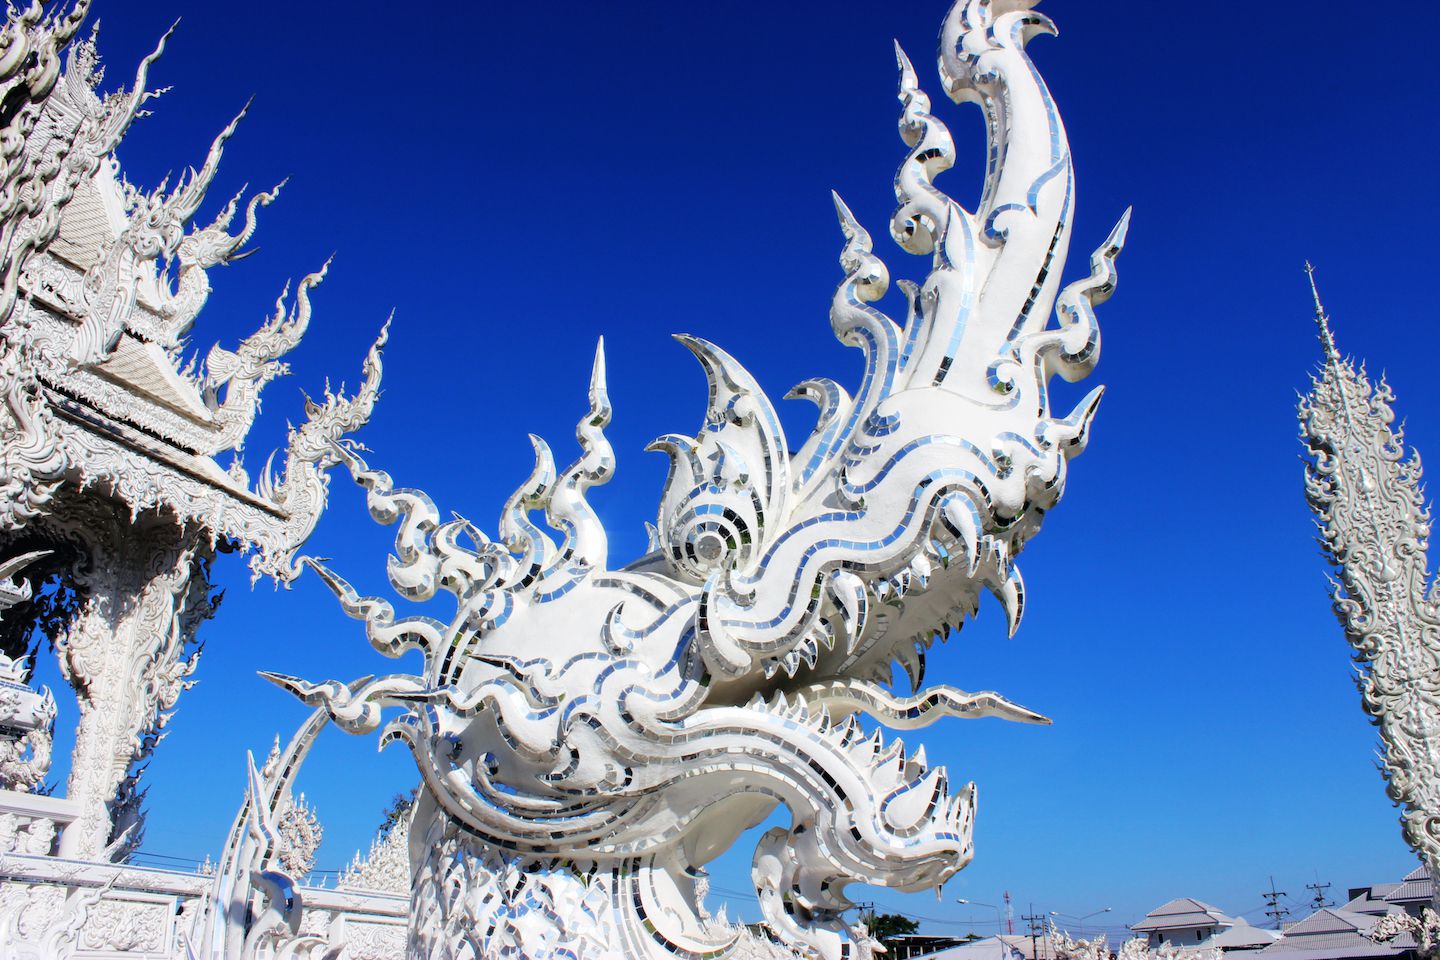 Dragon at the White Temple in Chiang Rai